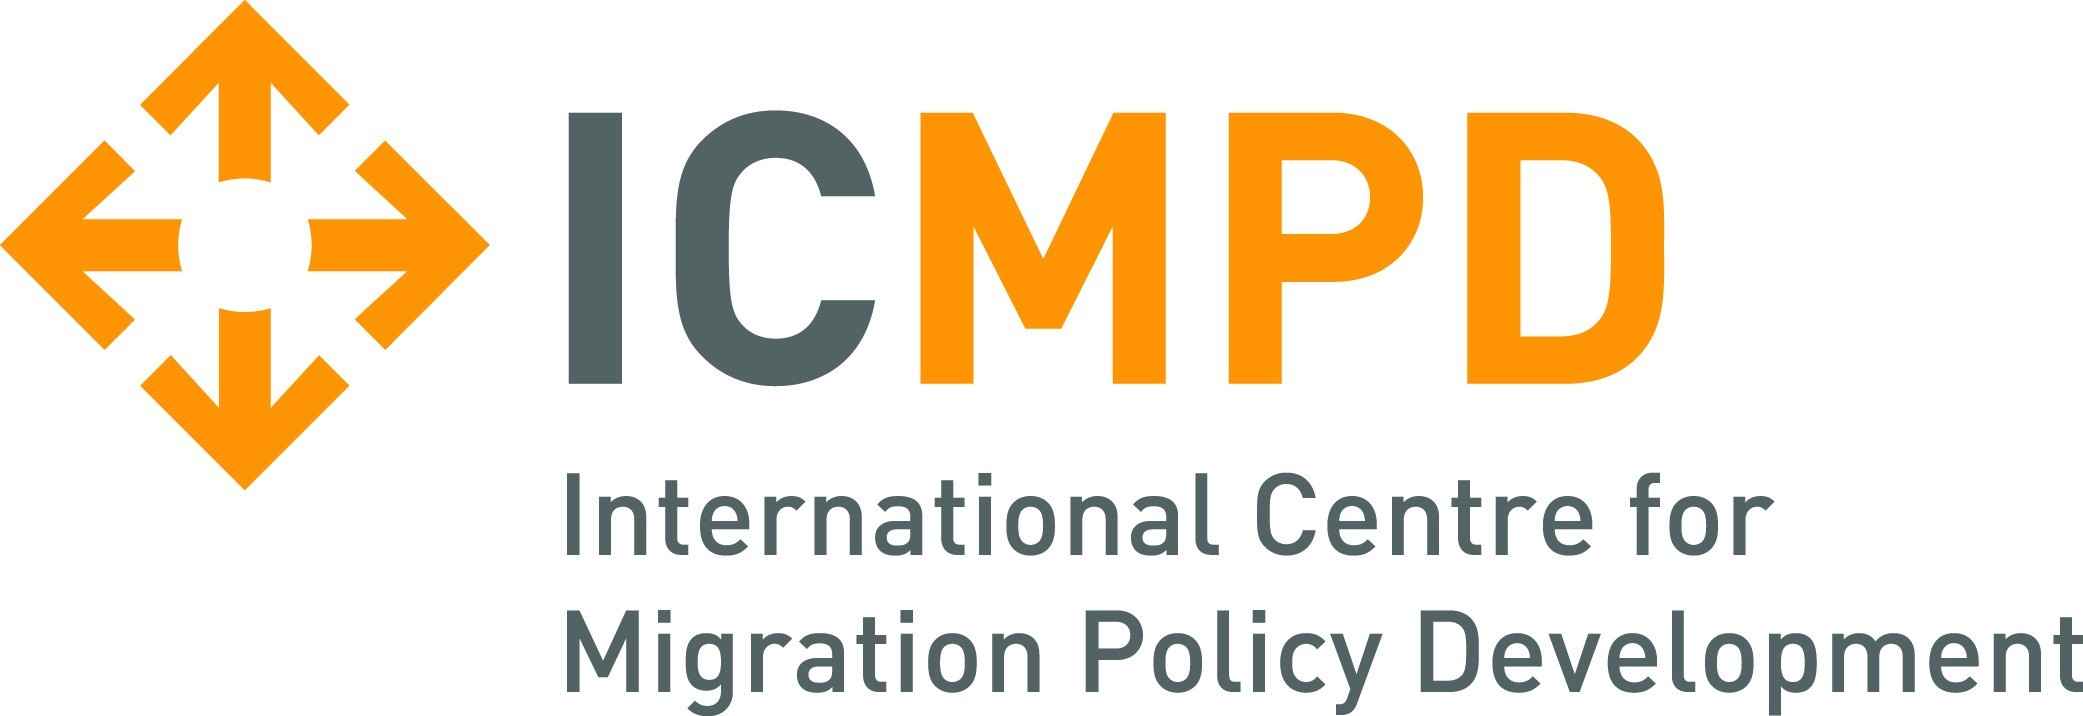 ICMPD - International Centre for Migration Policy Development Logo [EPS-PDF]